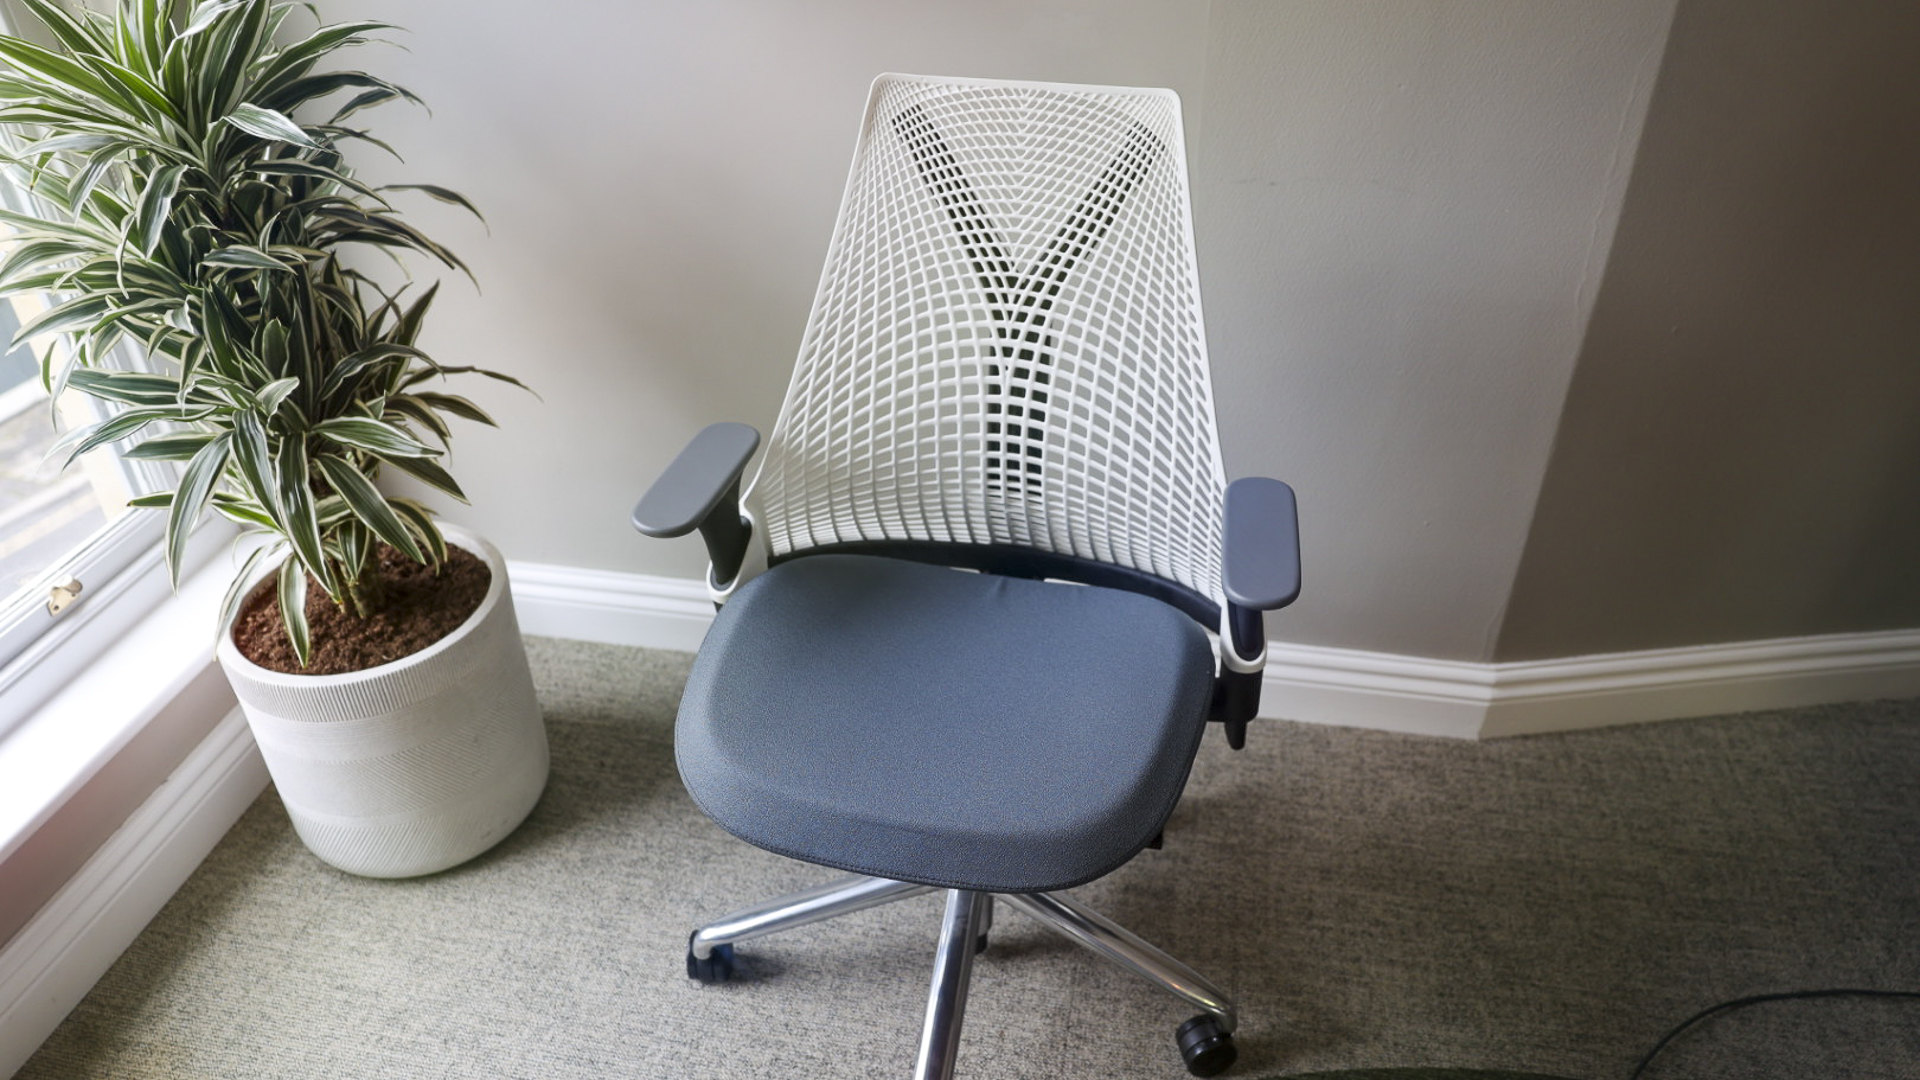 Herman Miller Sayl office chair review: I'll Sayl away with you